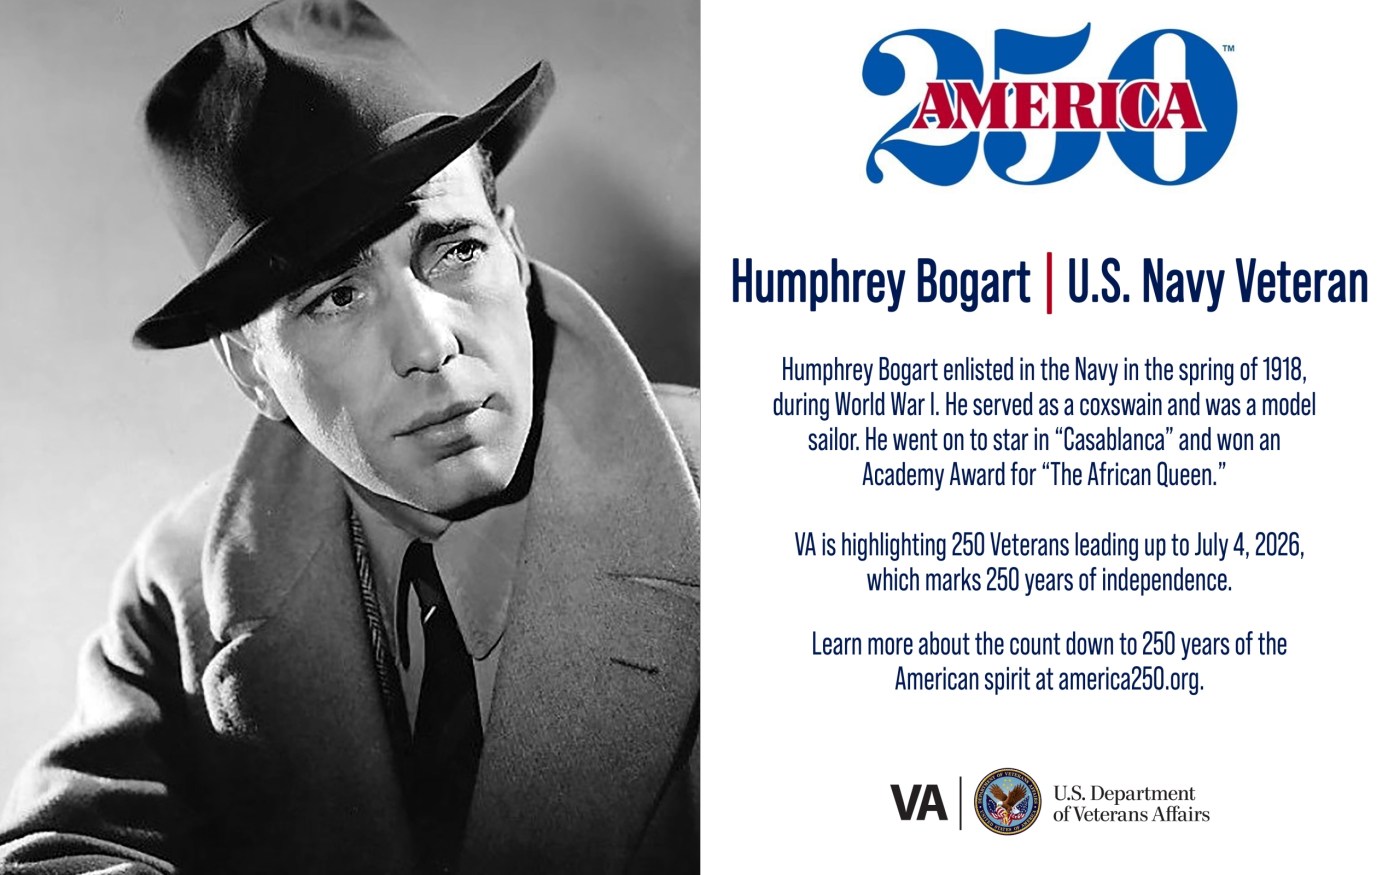 This week's America250 salute is Navy Veteran Humphrey Bogart, who served during World War I and later became an Academy Award-winning actor.